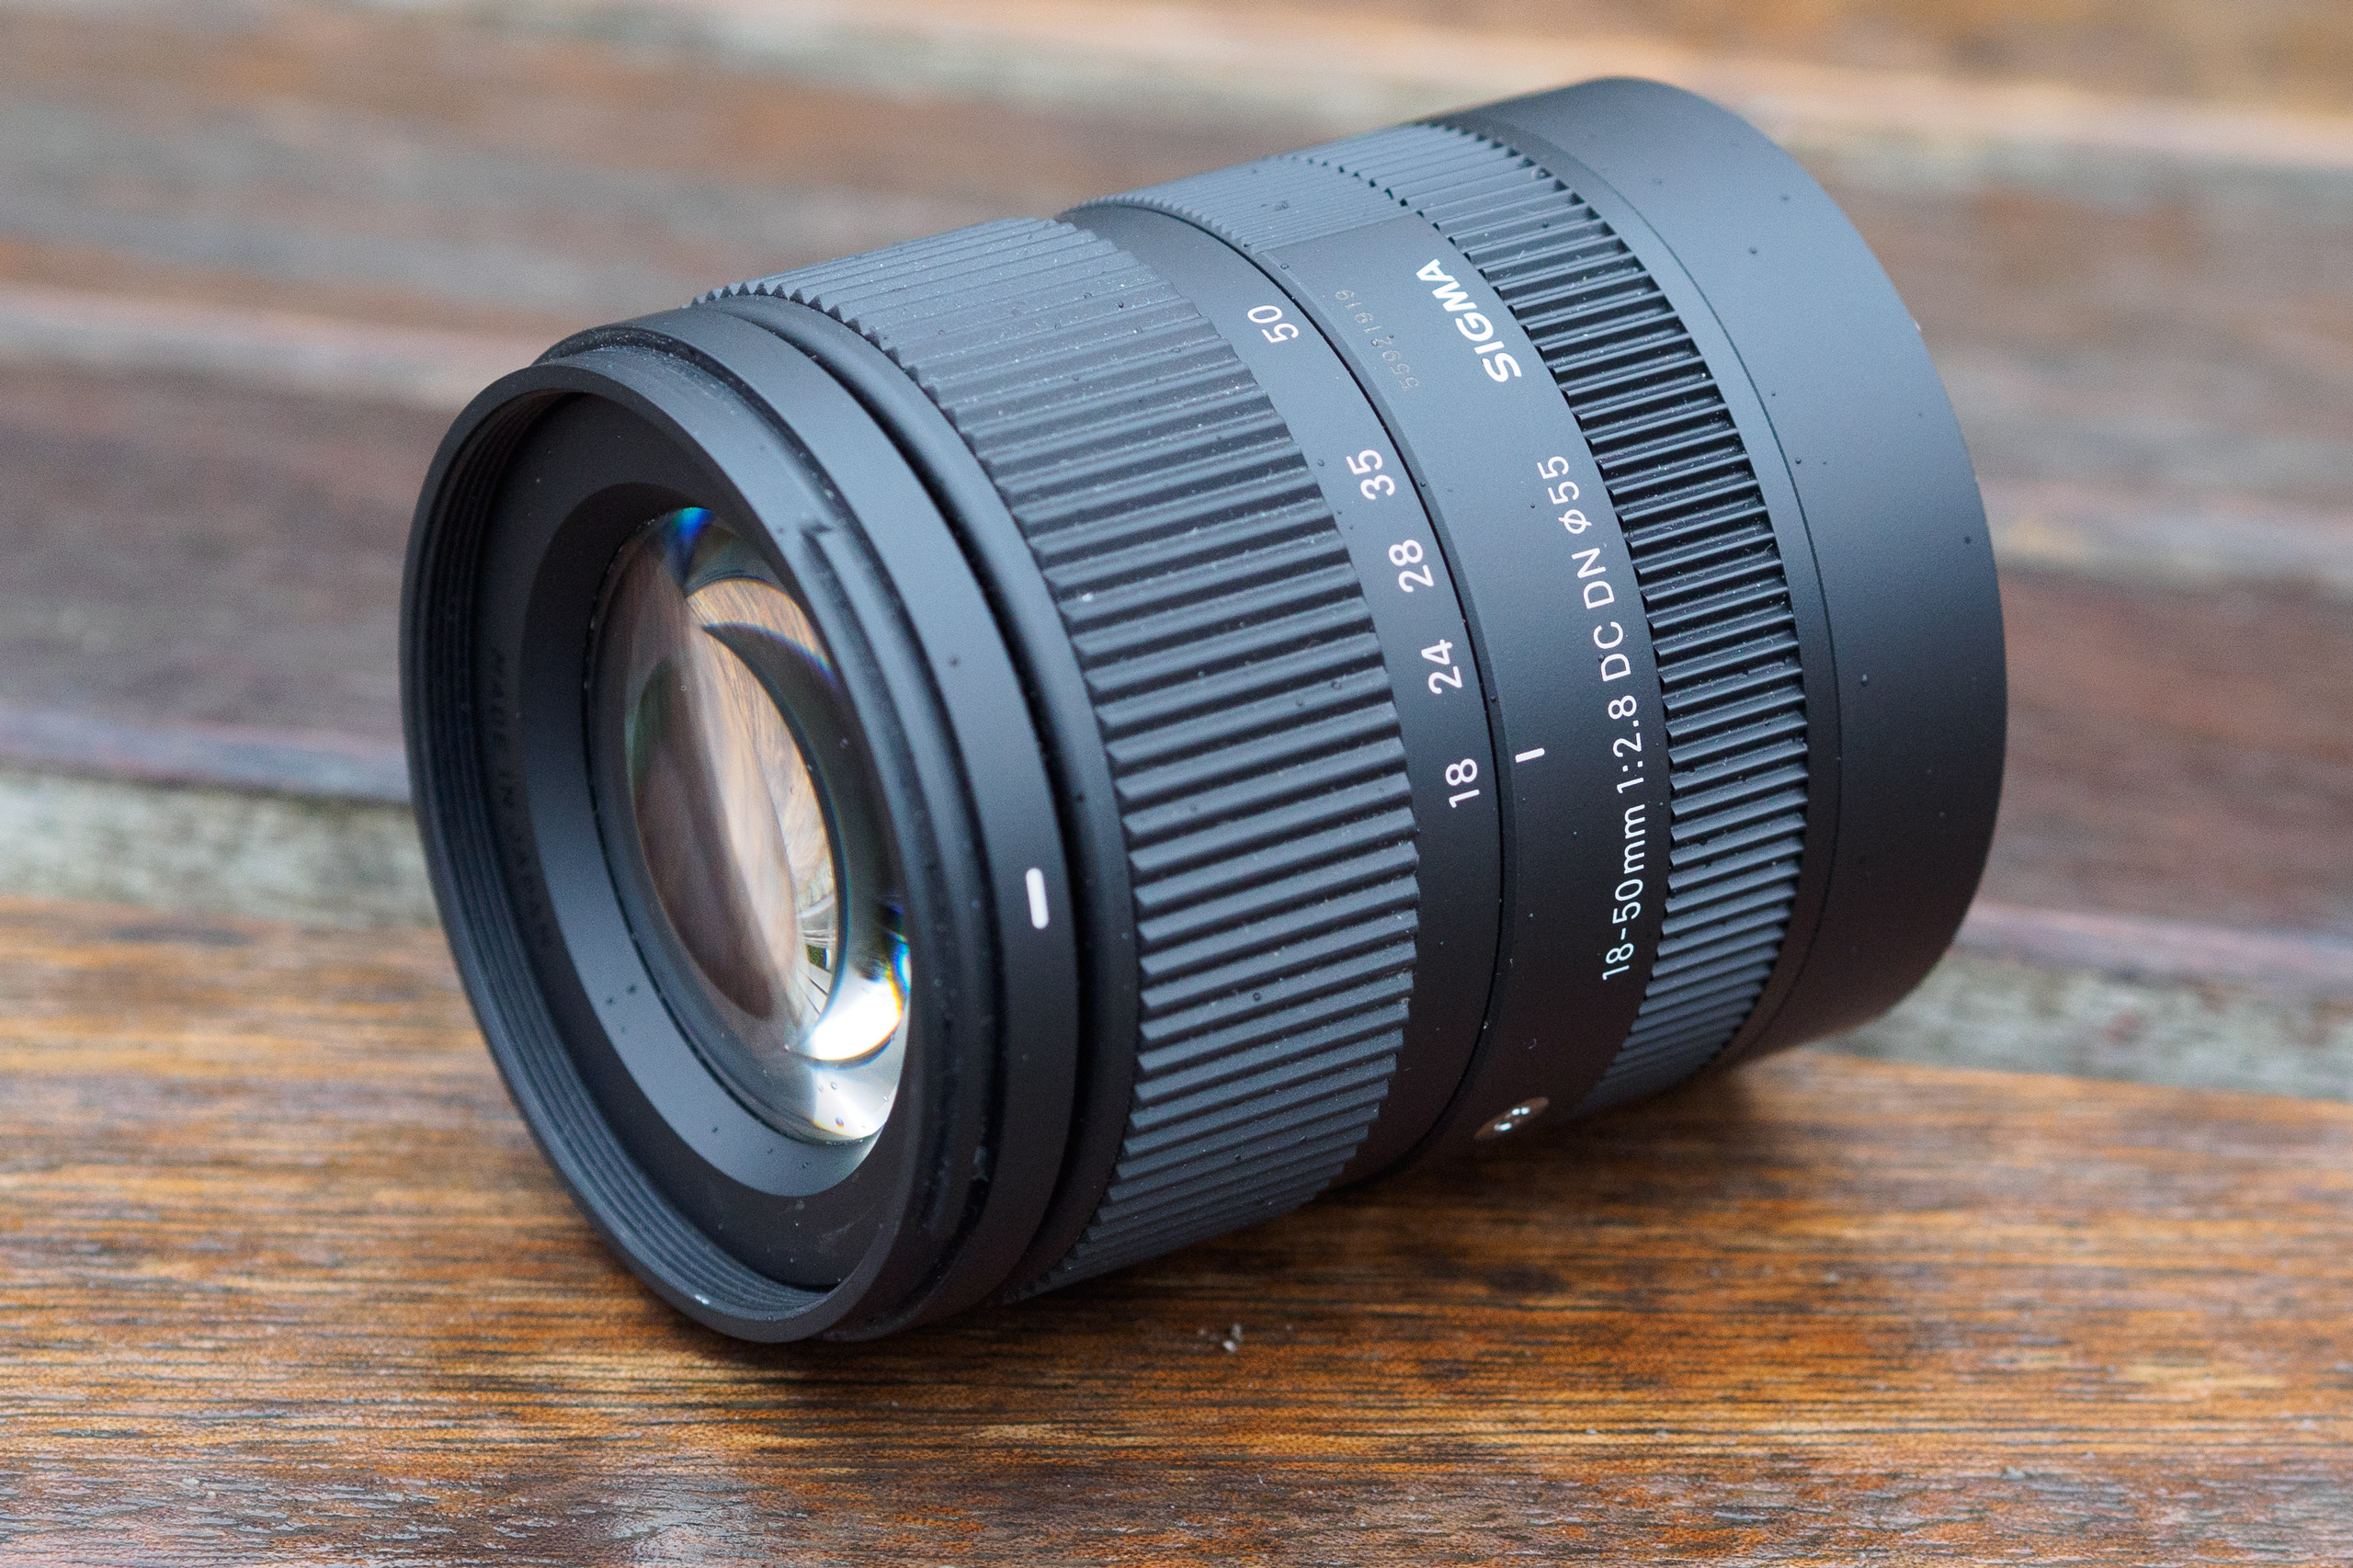 Sigma 18-50mm F2.8 DC DN | C review - a fine fast zoom for APS-C